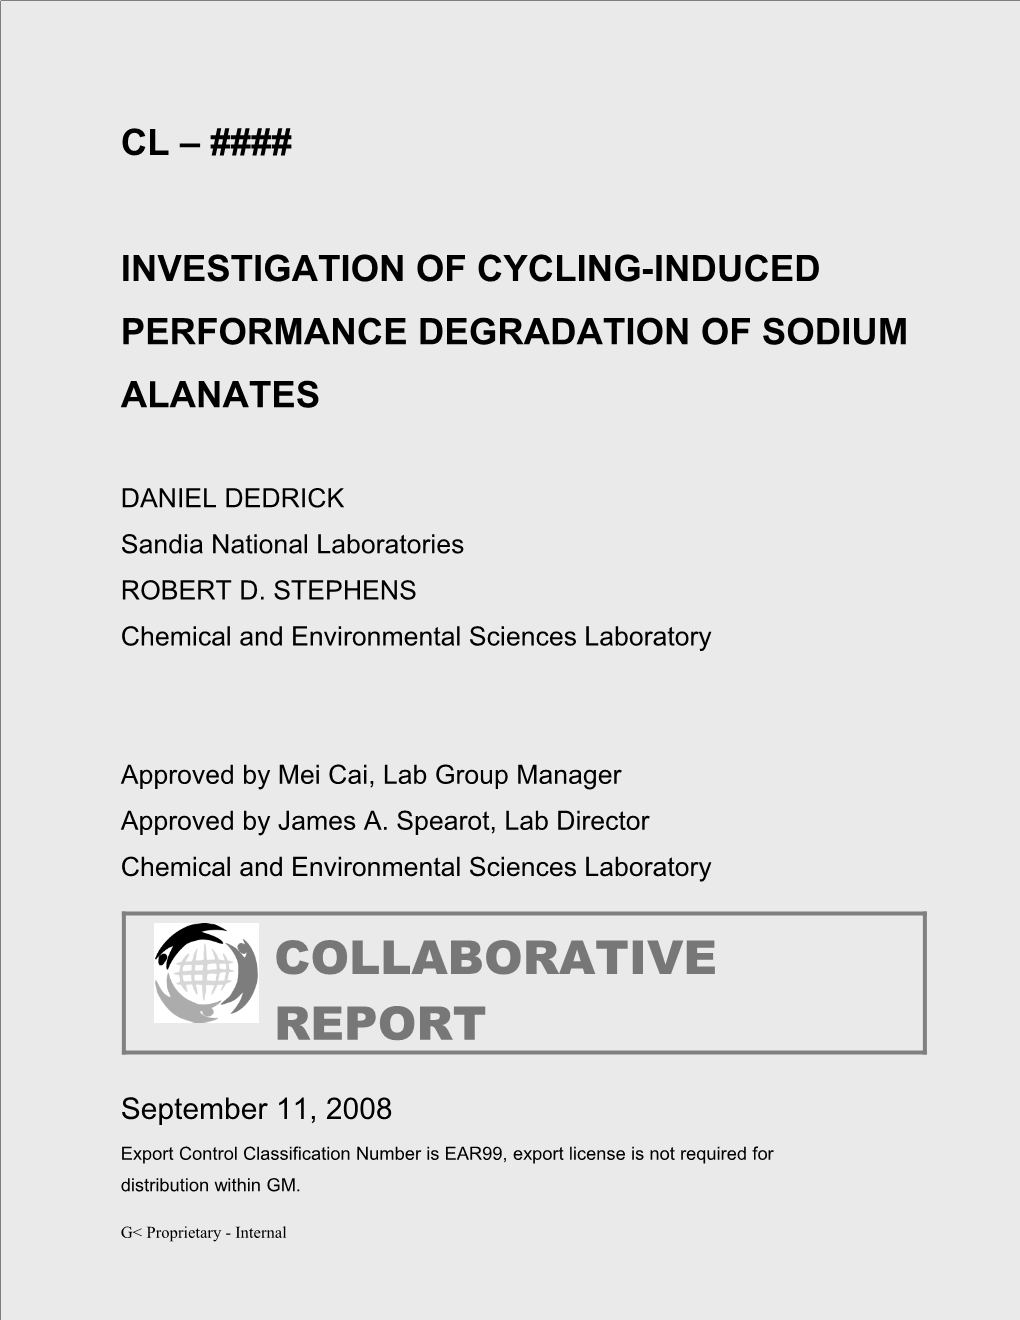 Investigation of Cycling-Induced Performance Degradation of Sodium Alanates